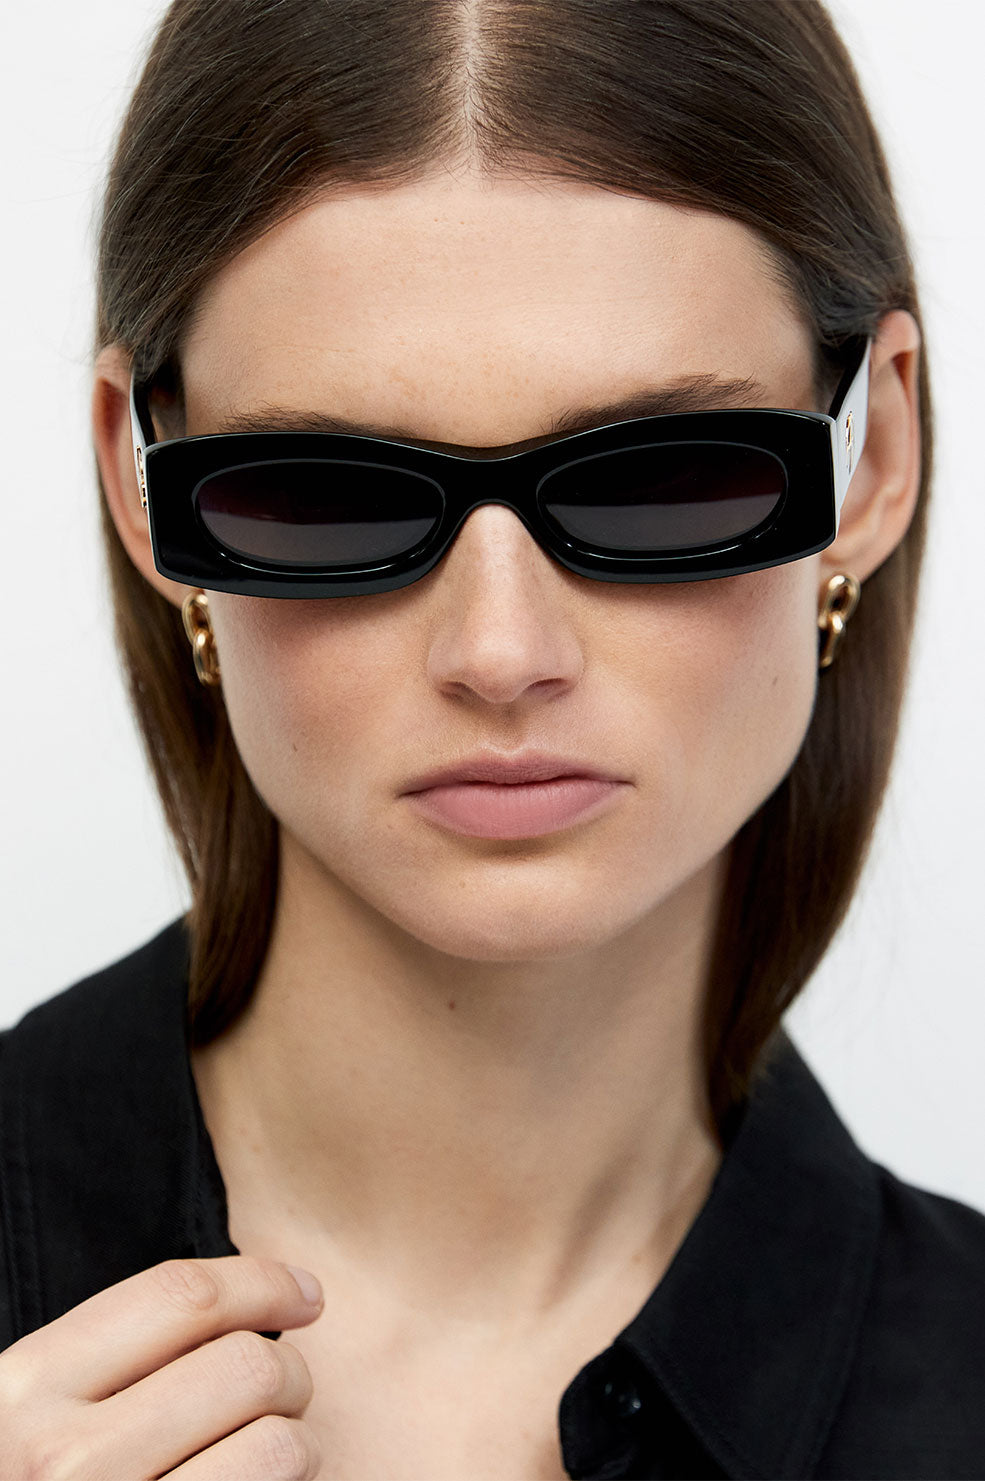 Anine Bing Malibu Sunglasses in Black available at TNT The New Trend Australia. Free shipping for orders over $300 AUD.